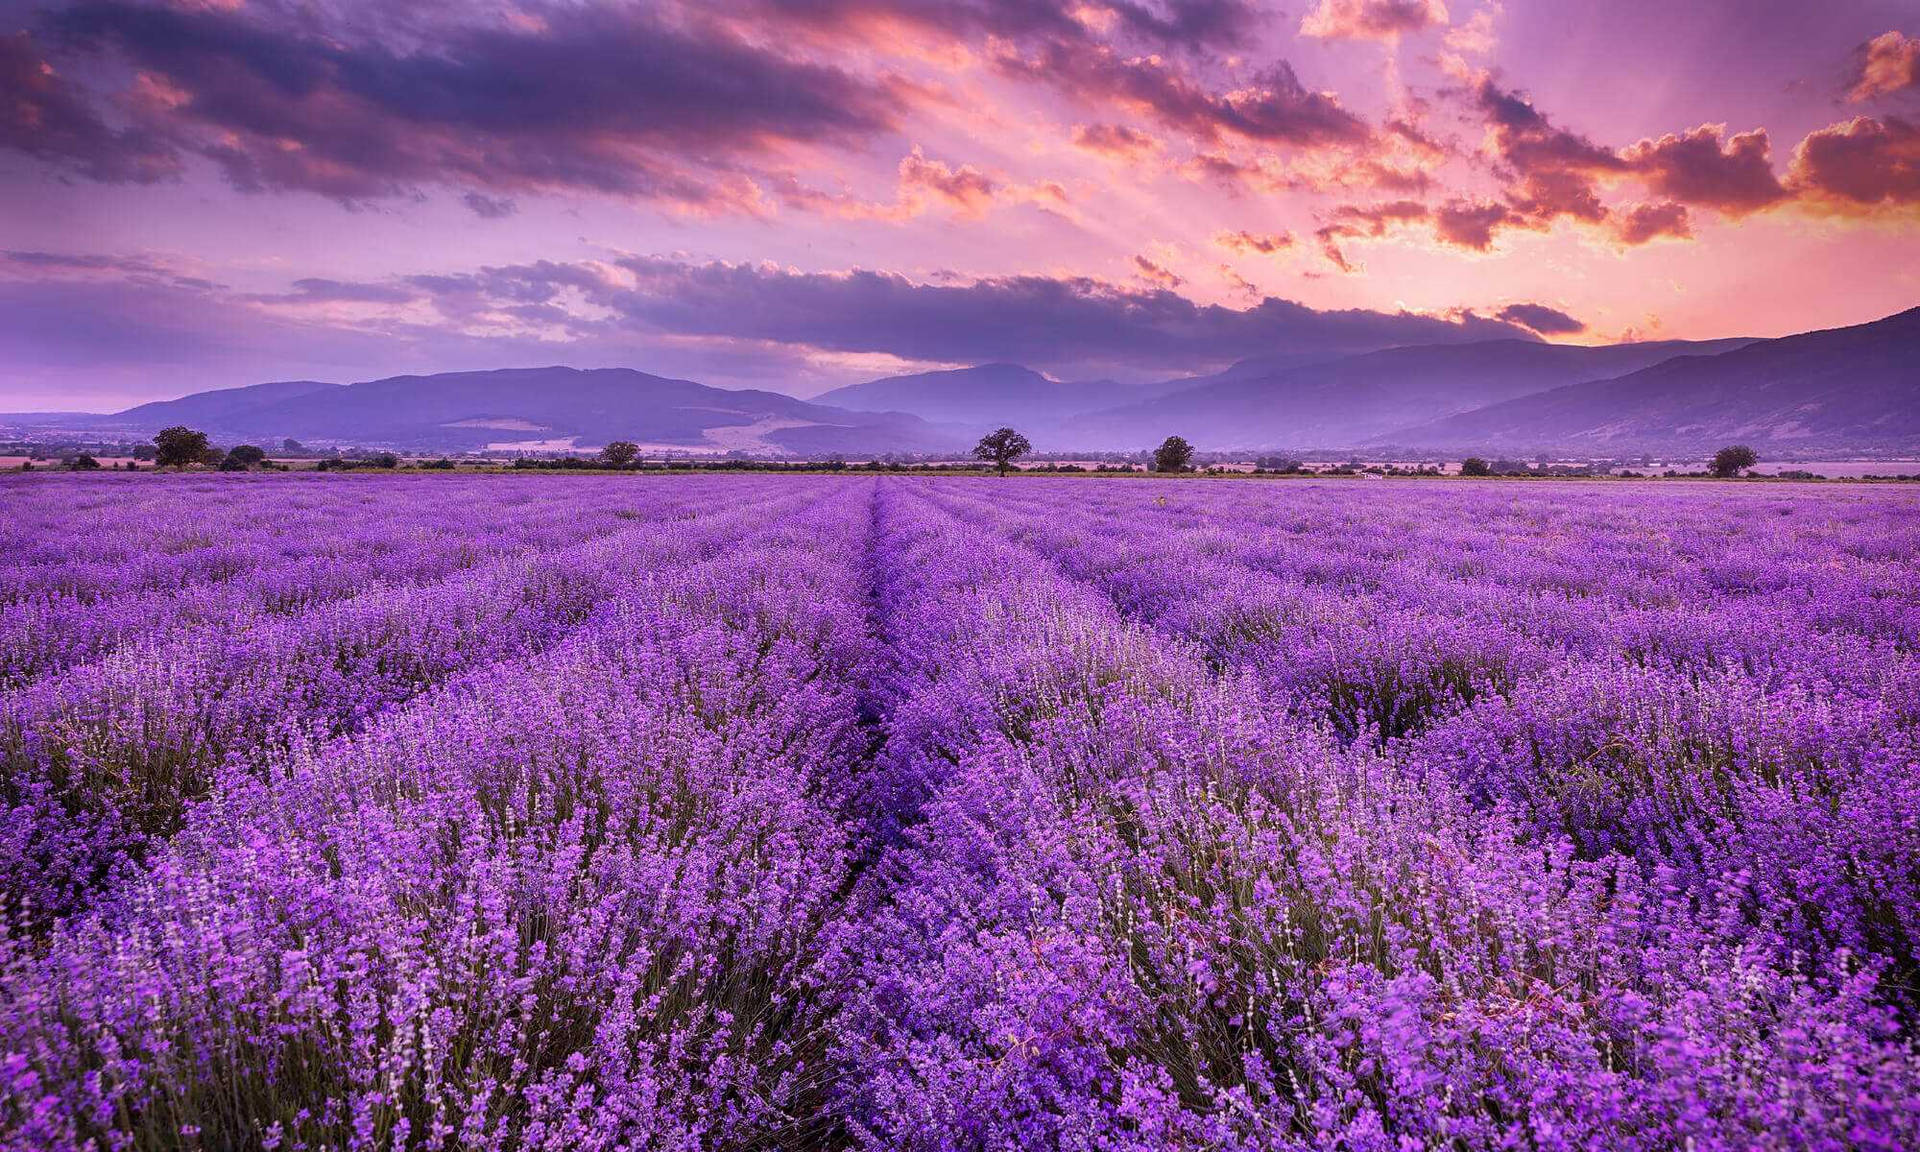 Lavender Field And Mountain Range